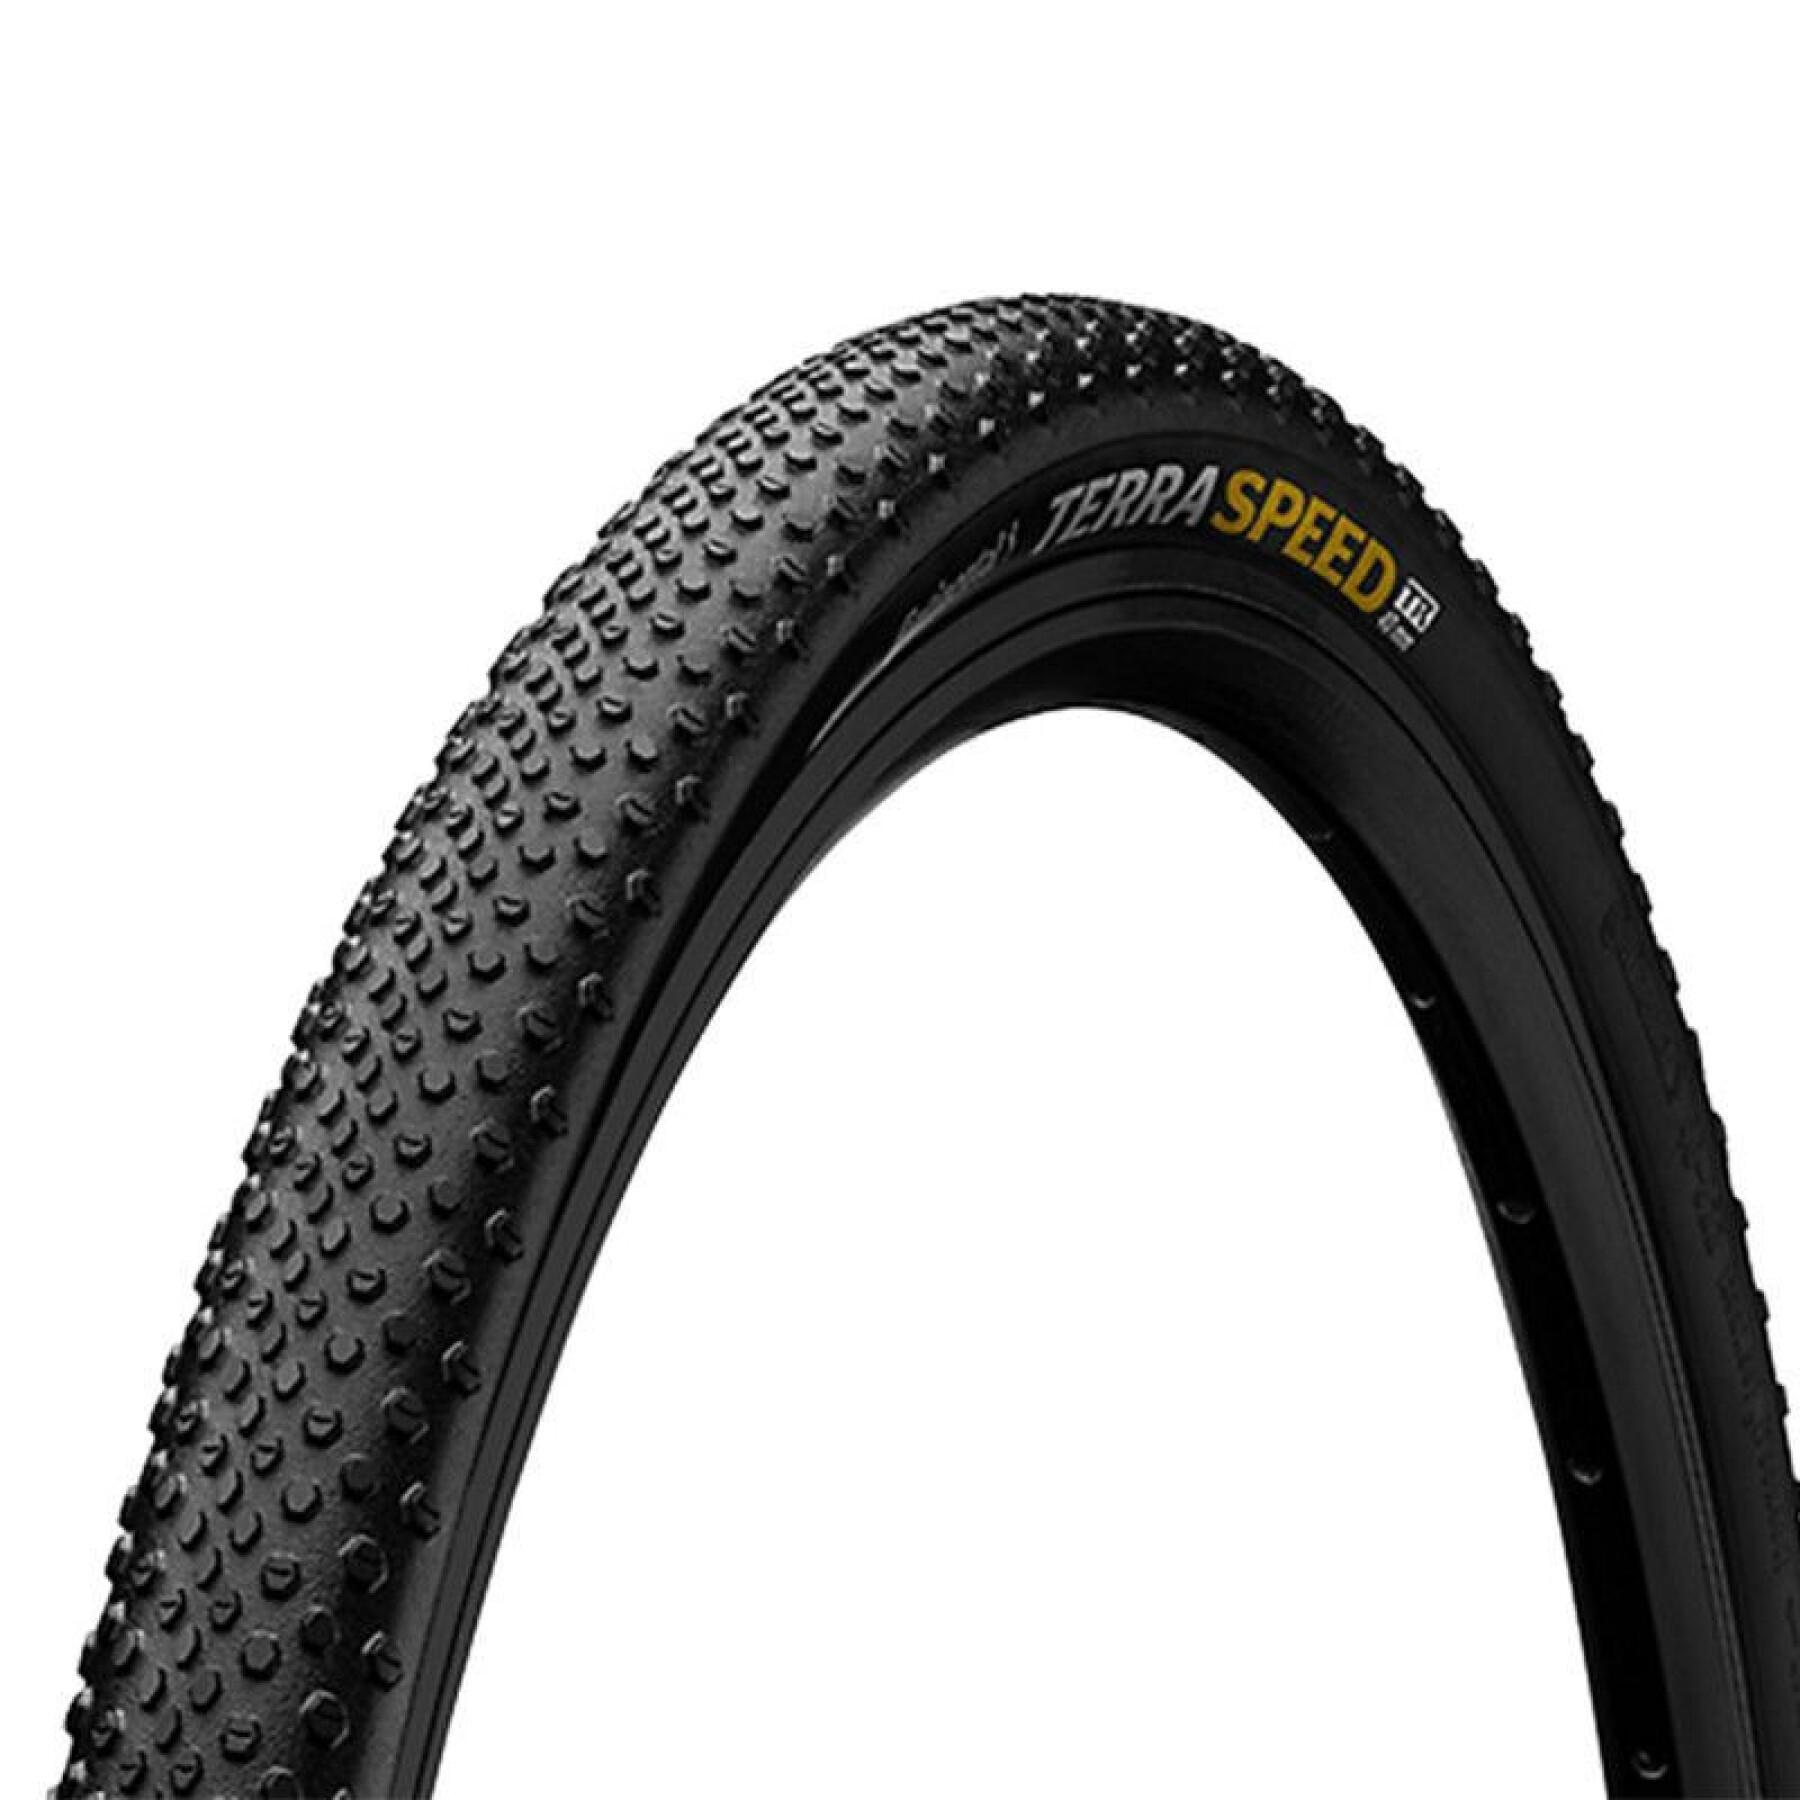 Band gravel protection Continental Terra Speed Tubetype-Tubeless Ts (35-622)